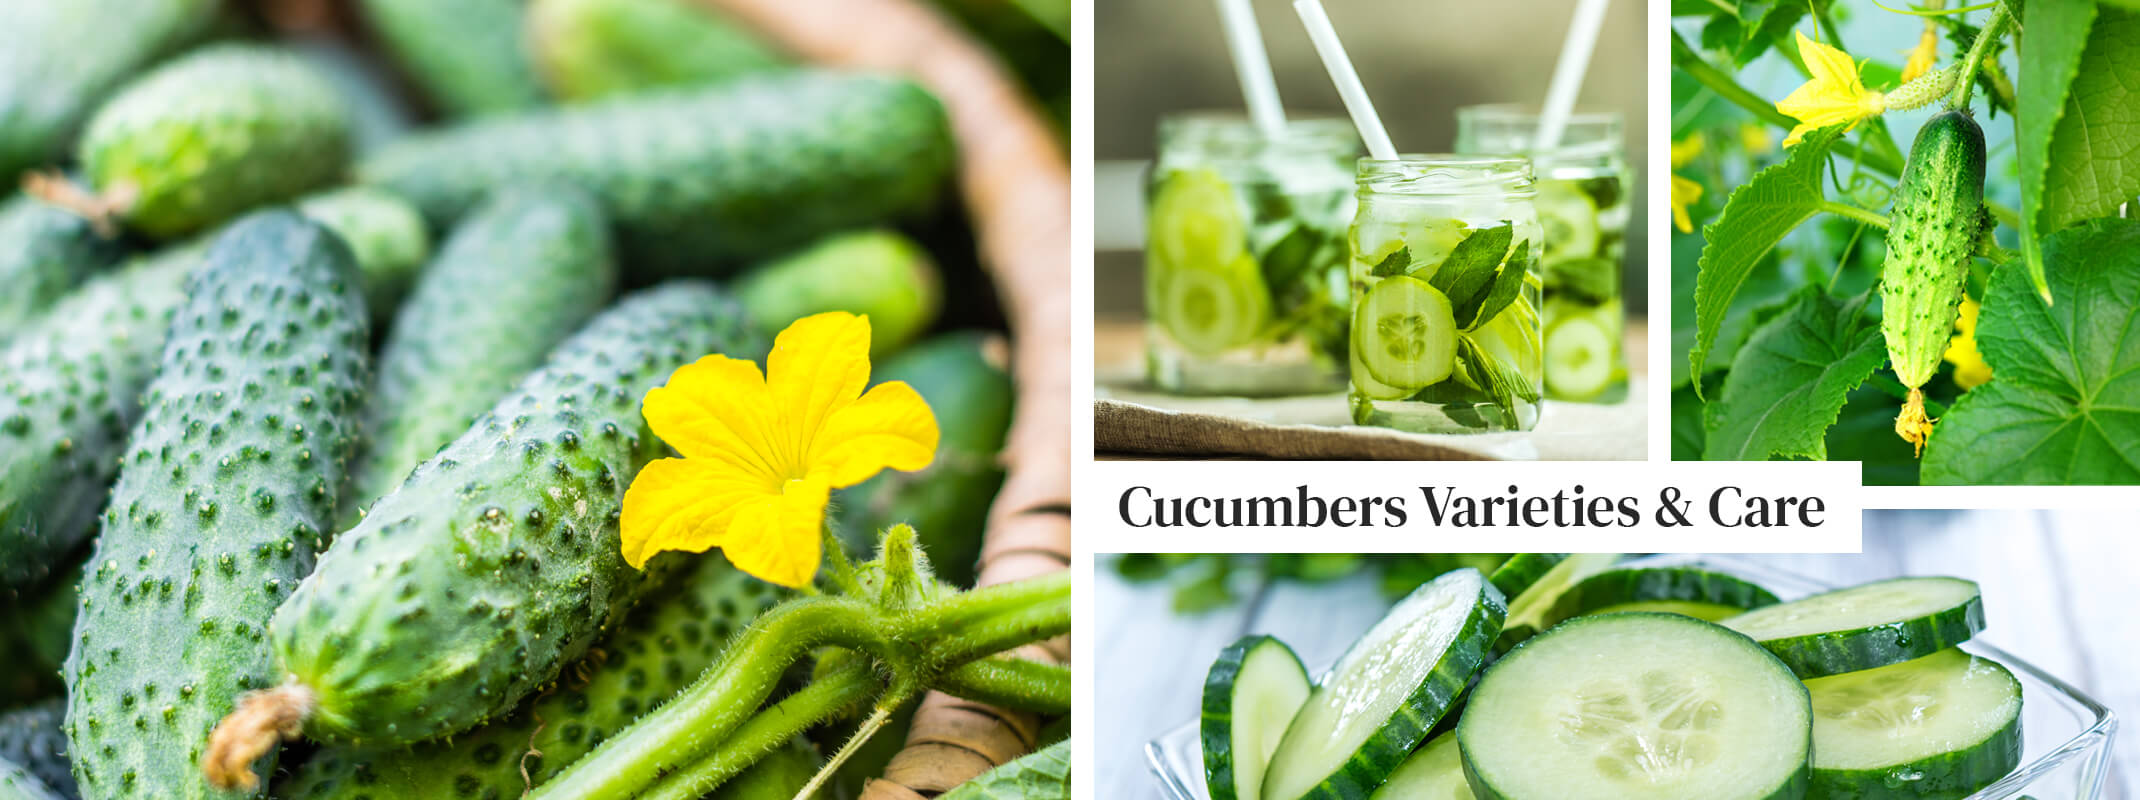 Cucumbers in a basket, cucumbers and mint in water, cucumber plant and sliced cucumbers